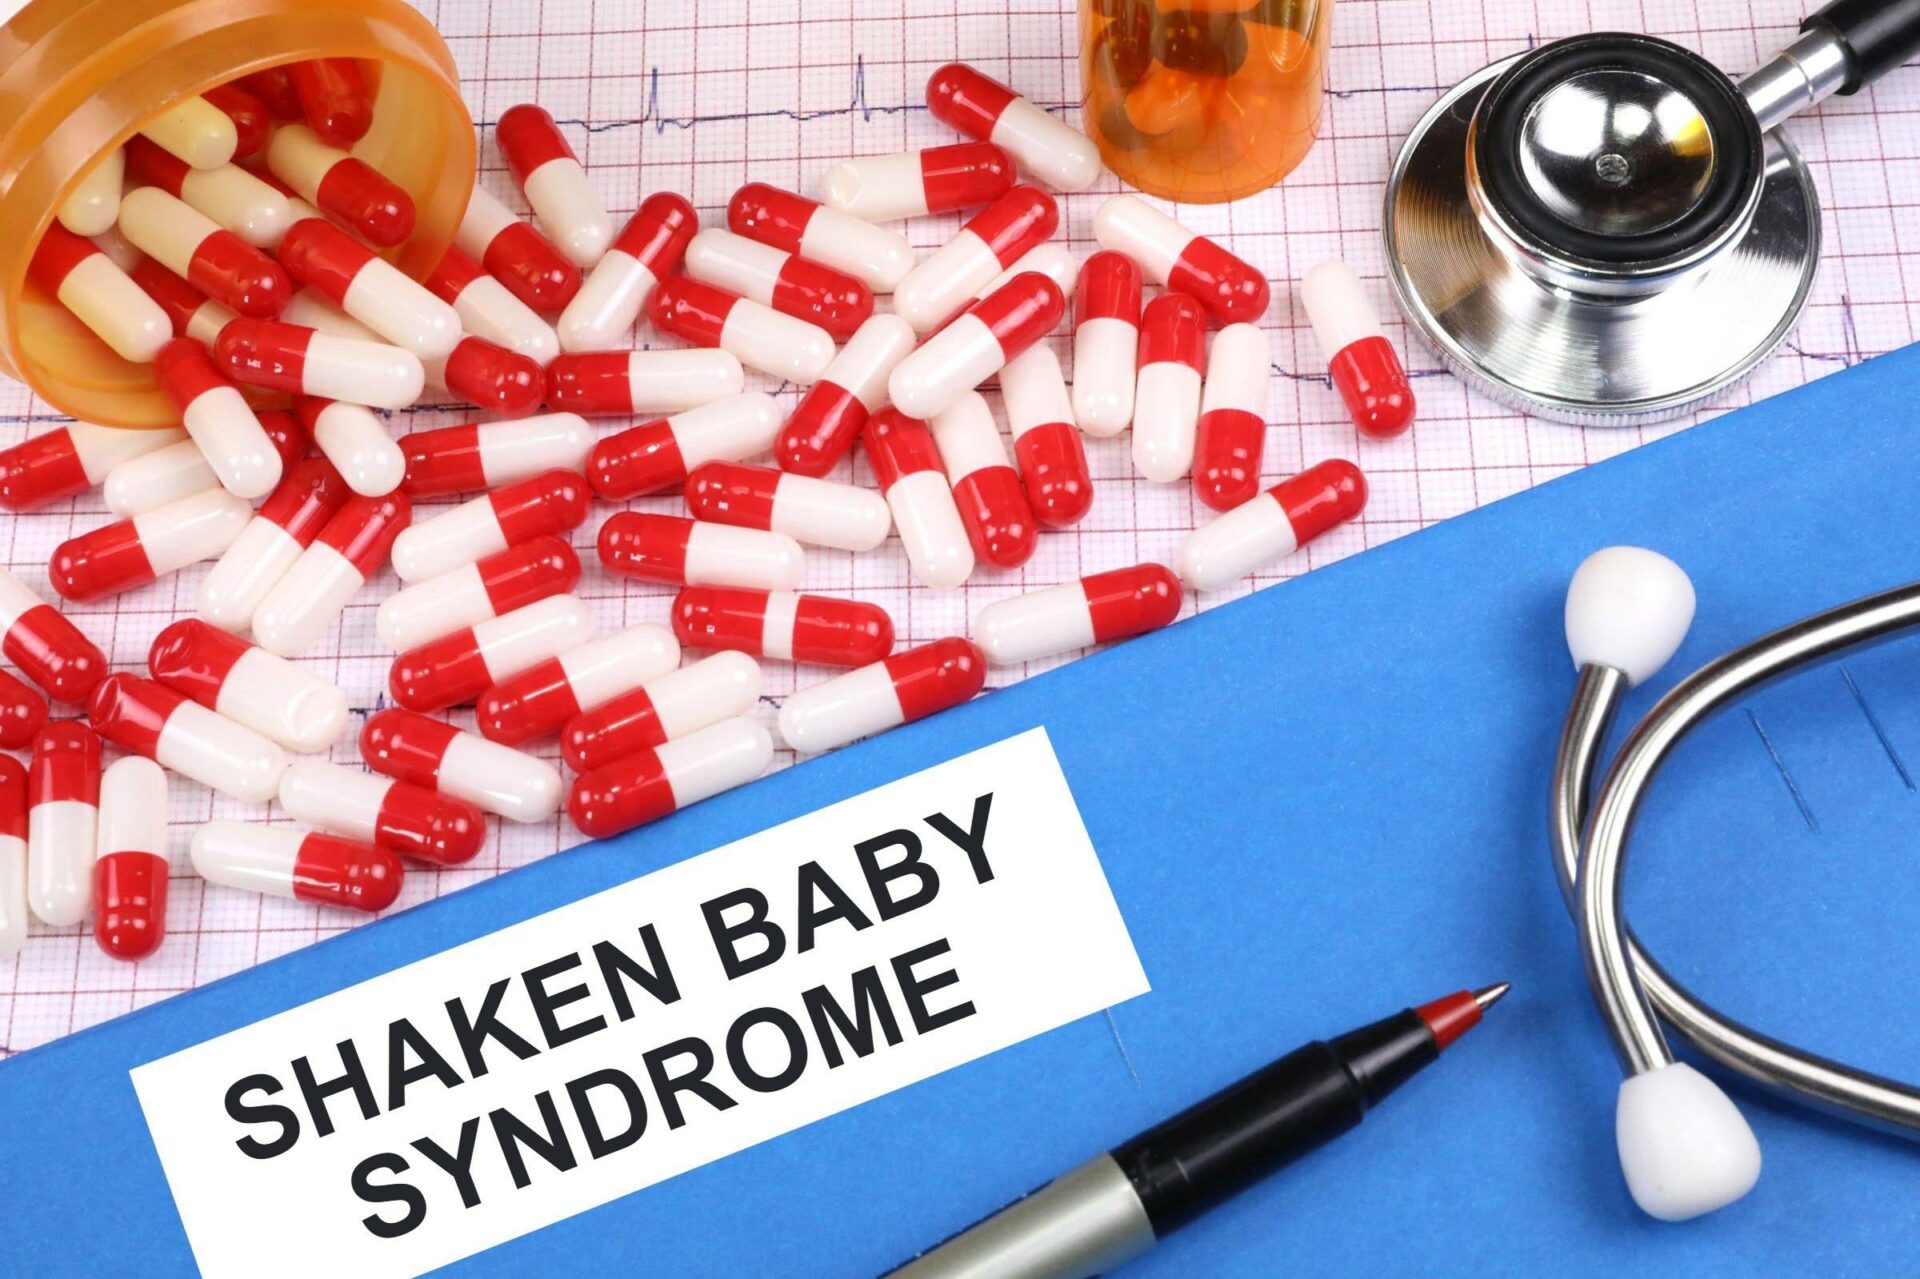 What’s Shaken Baby Syndrome In French